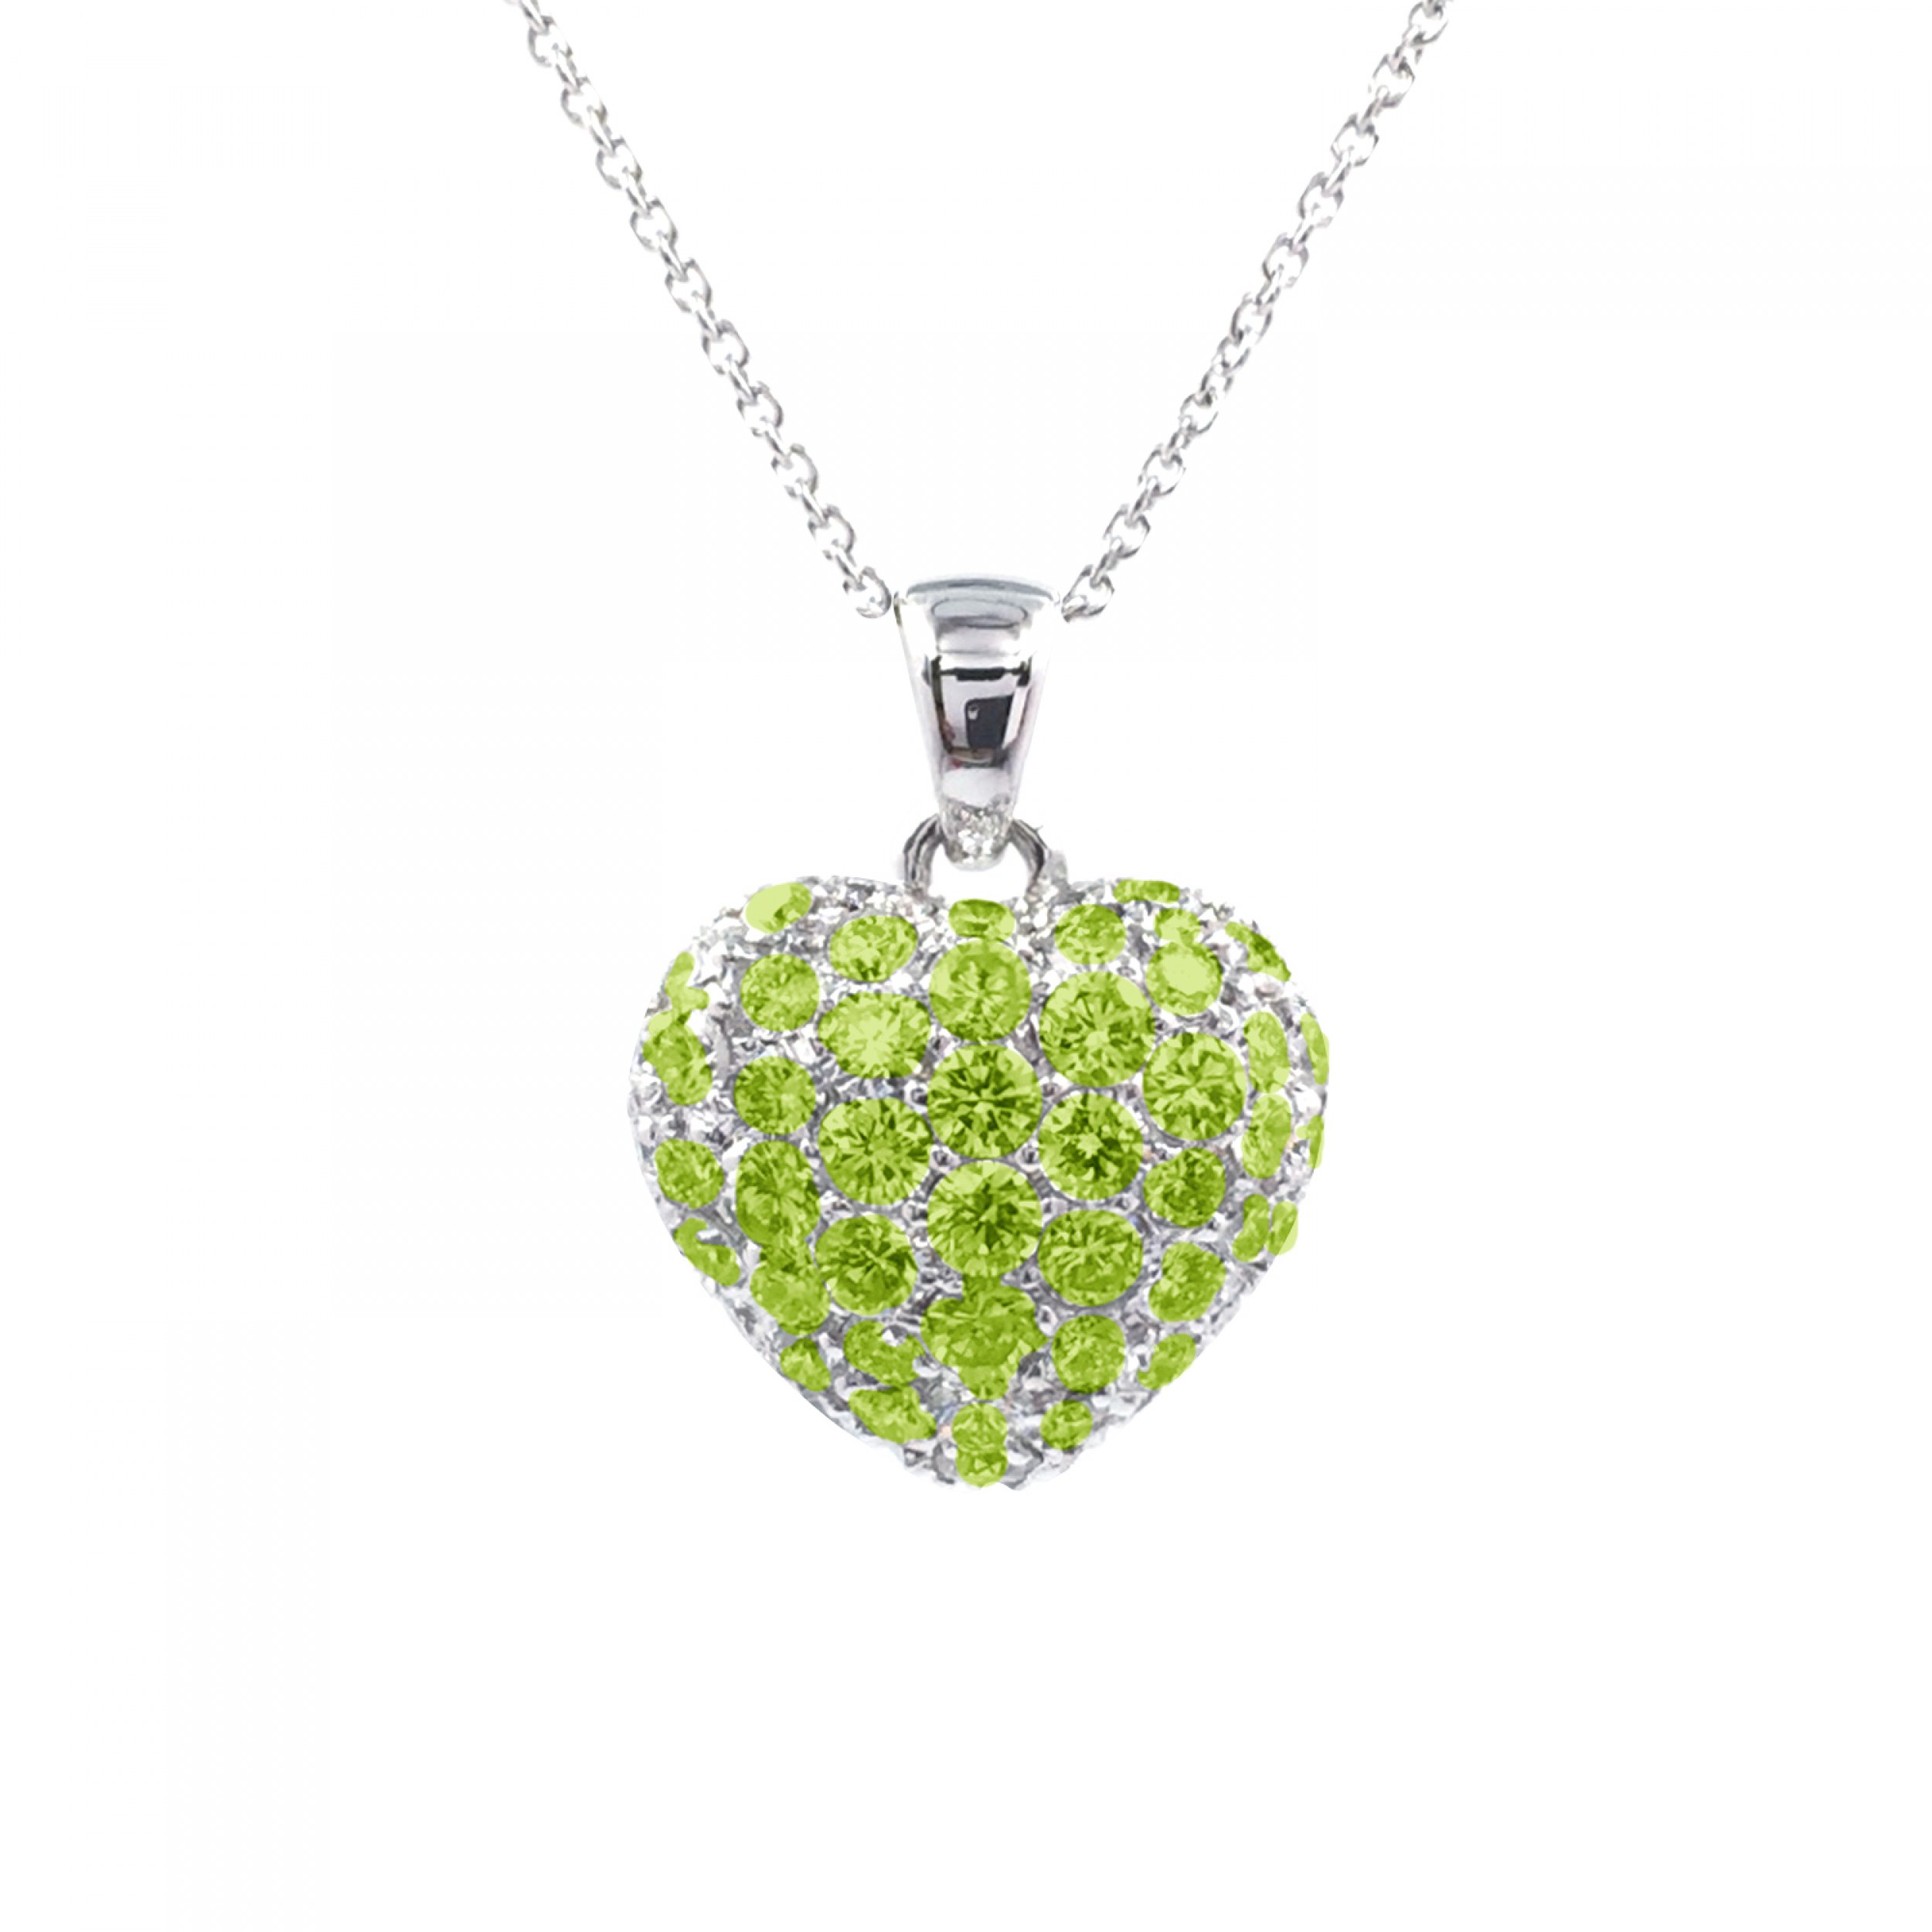 .28ctw single bale pave set heart peridot necklace in 14k white gold ECTLXIF